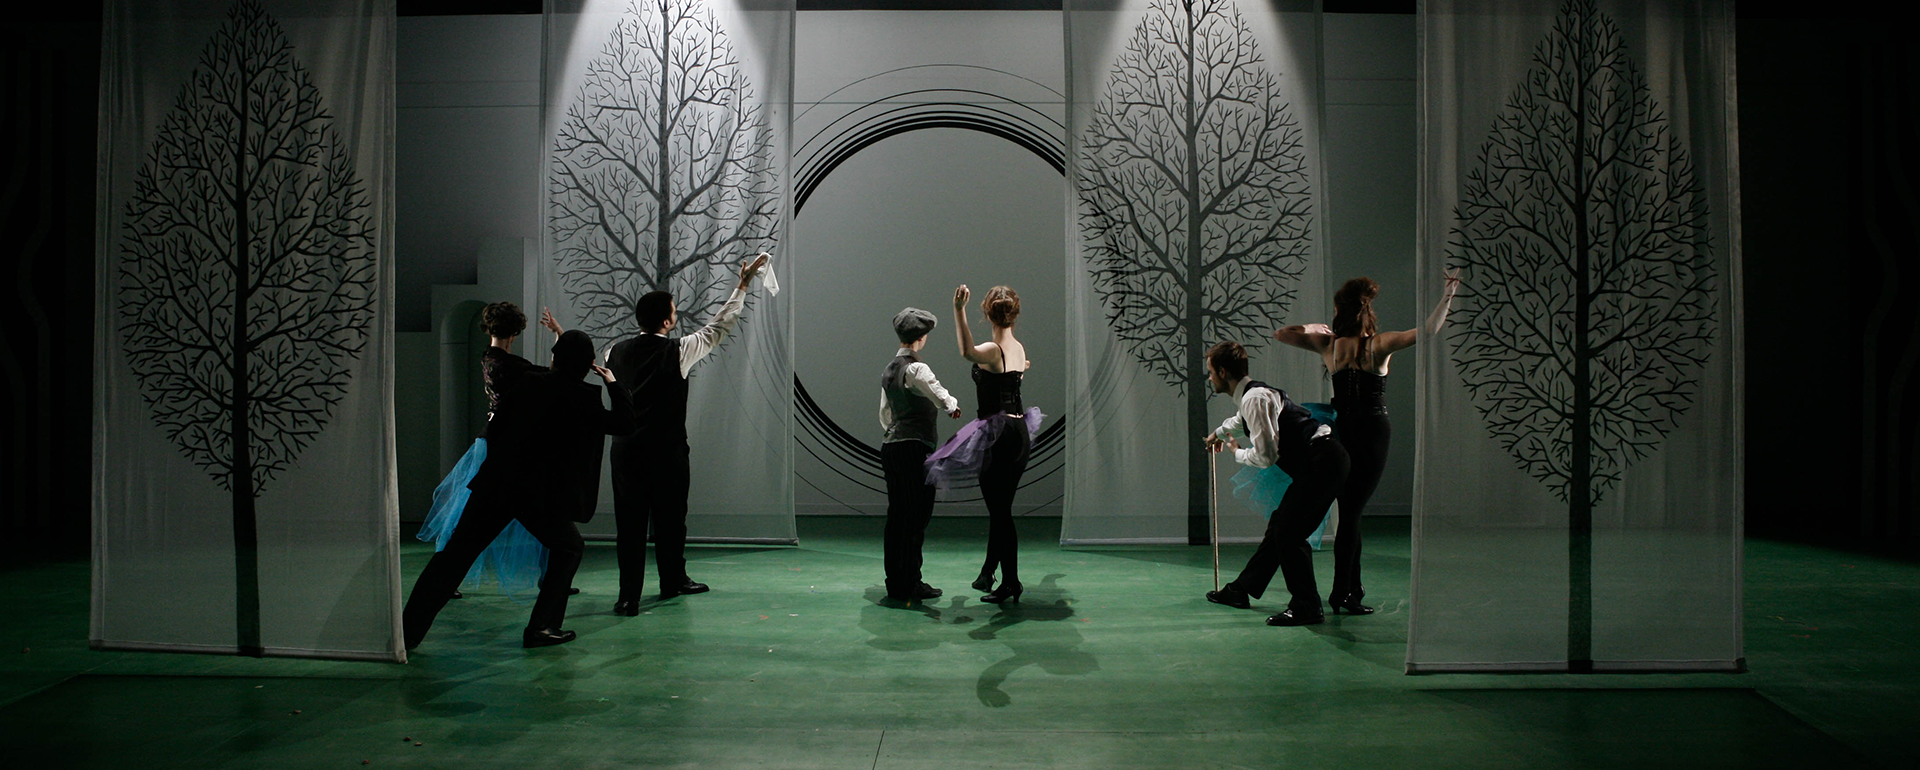 Seven performers on a stage with moody lighting and tree backdrops